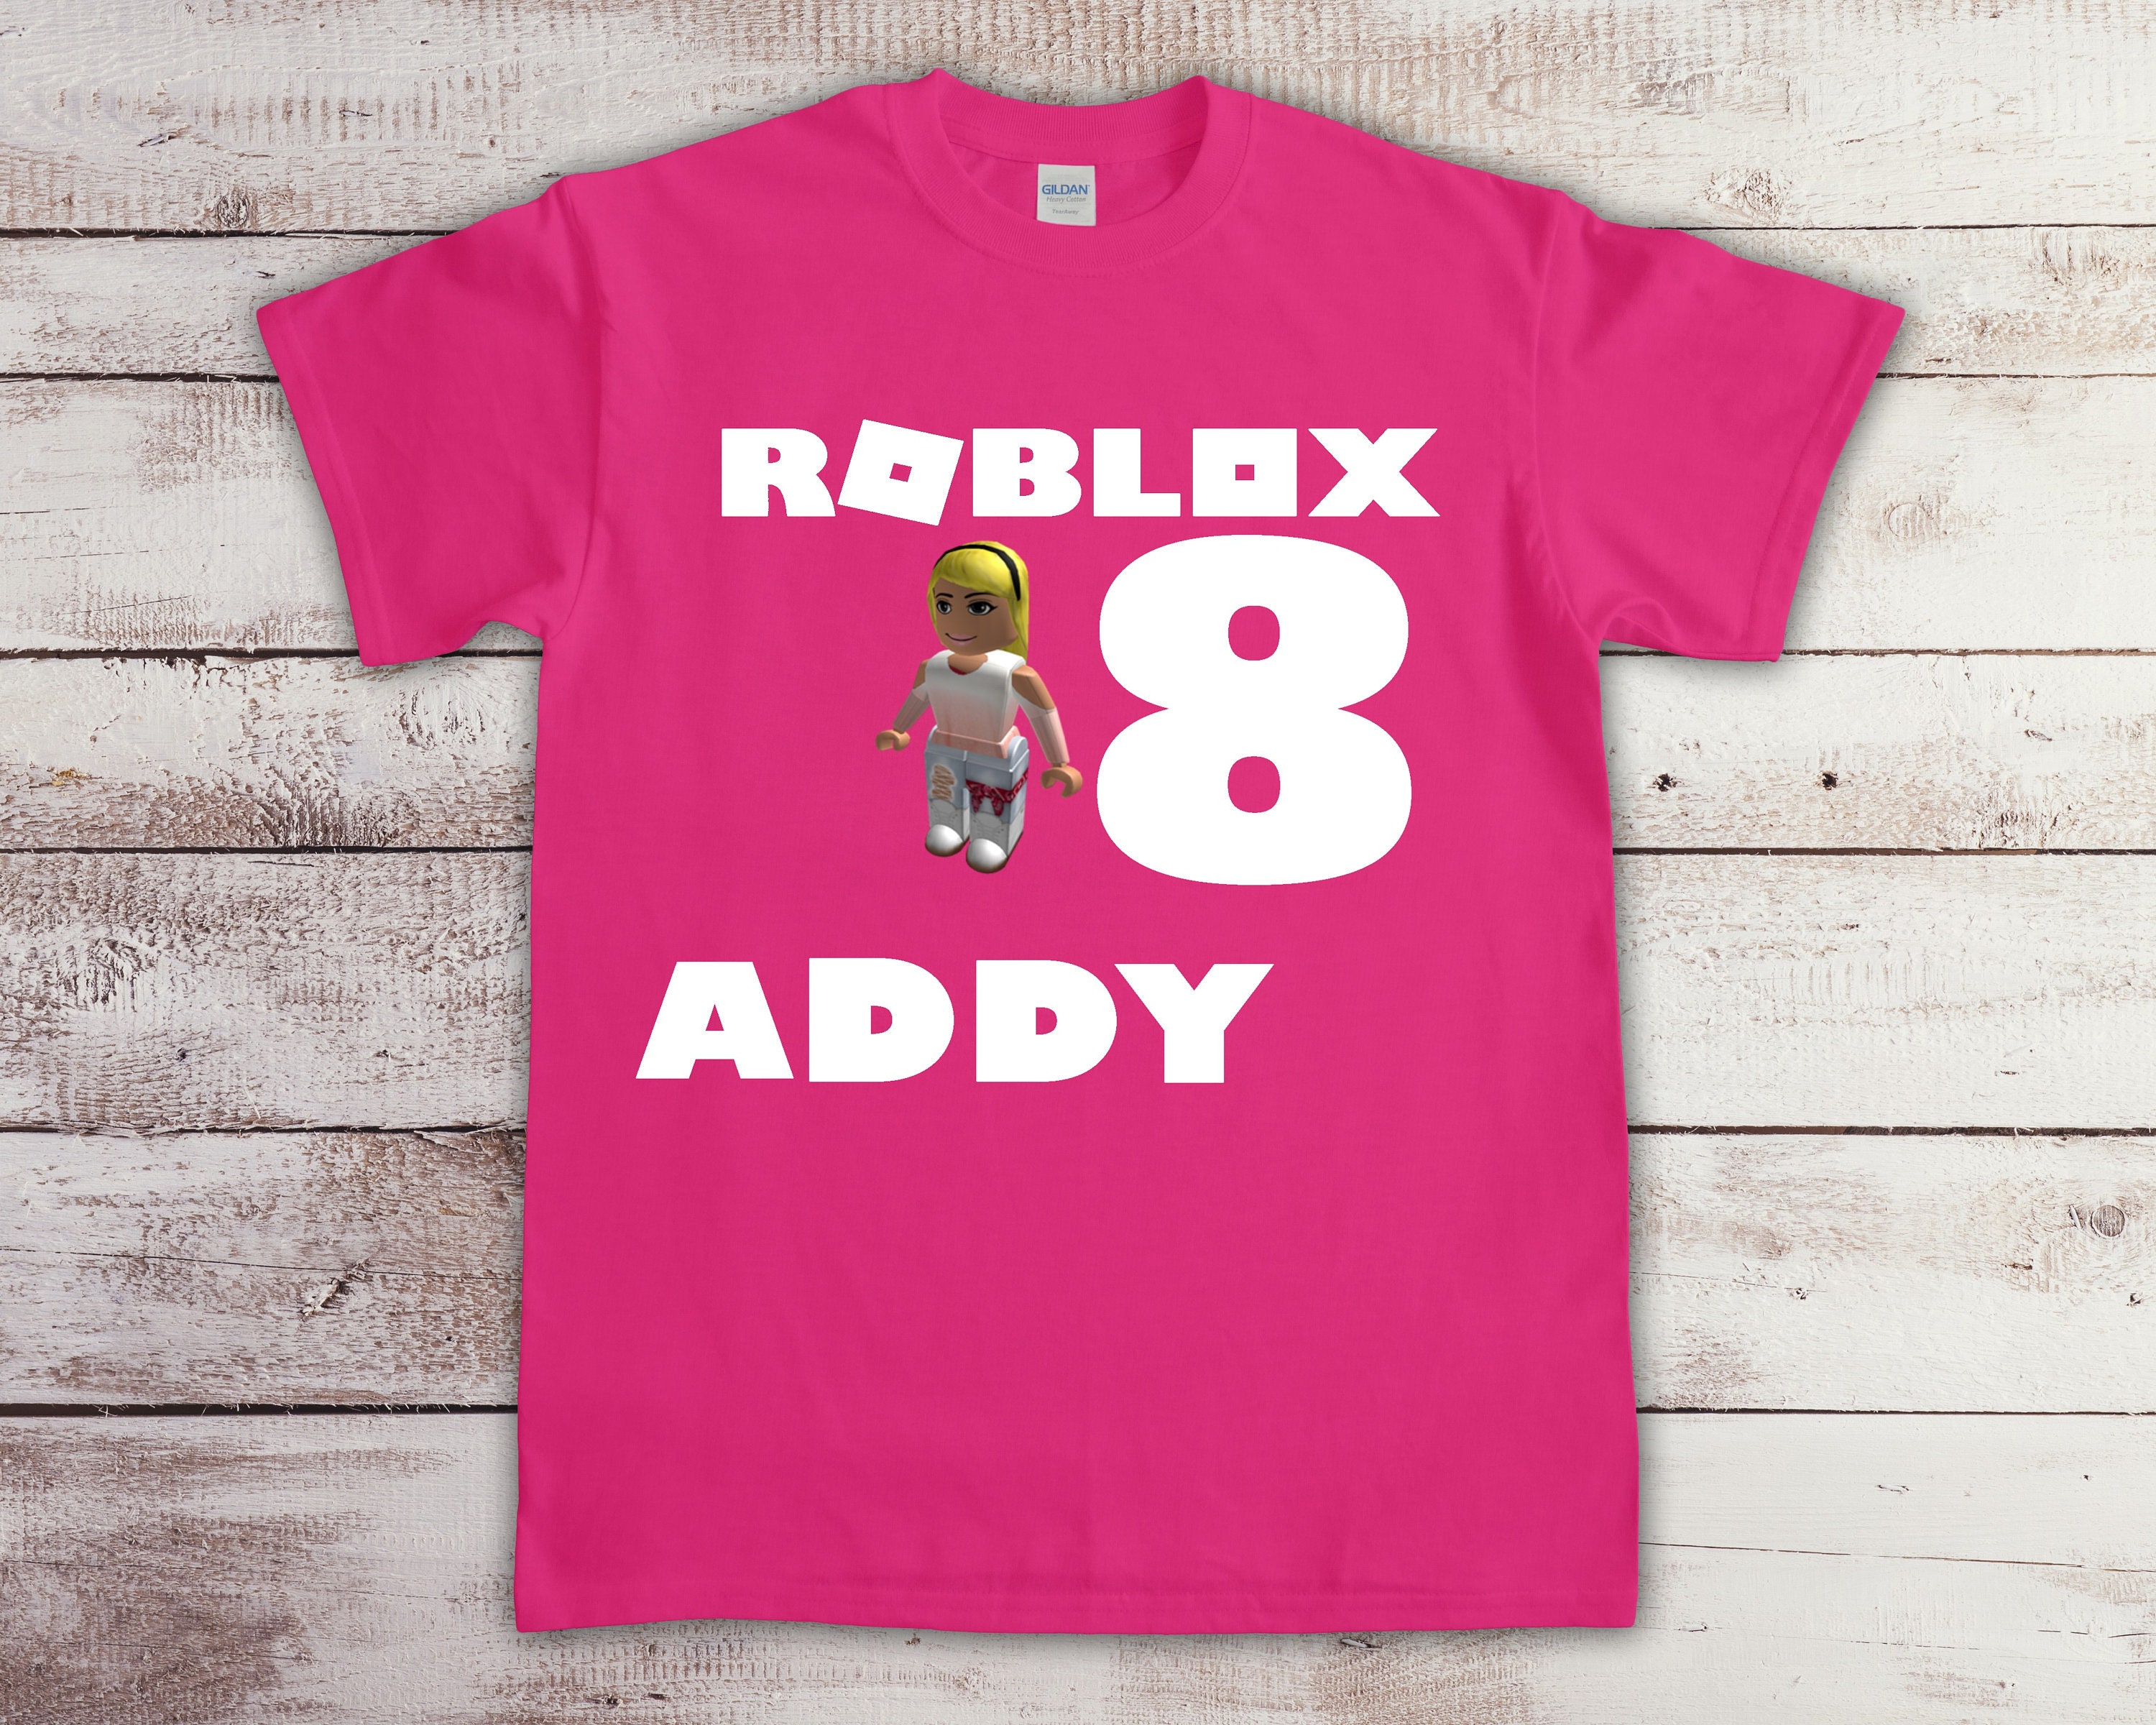 belly-t-shirt-on-roblox